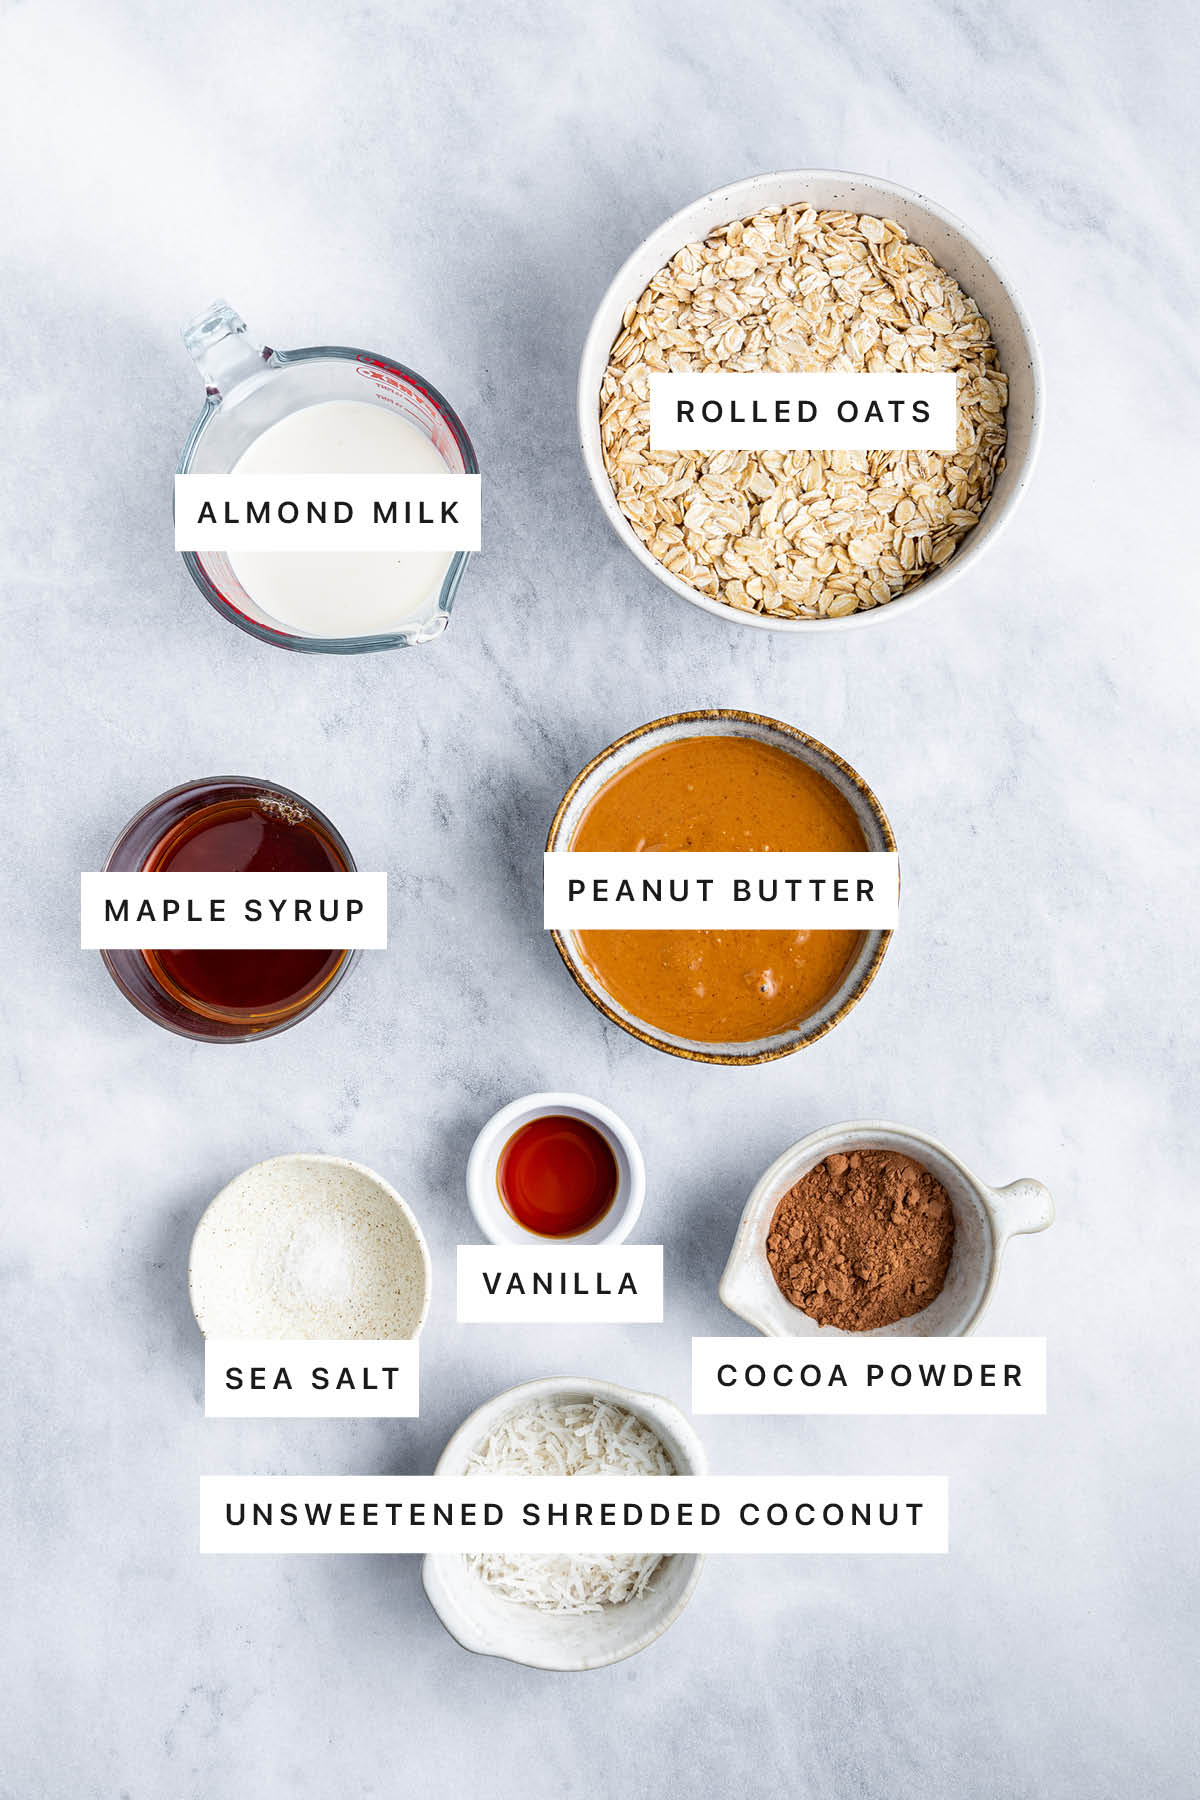 Ingredients measured out to make Healthy No Bake Chocolate Coconut Bars: almond milk, rolled oats, maple syrup, peanut butter, sea salt, vanilla, cocoa powder and shredded coconut.